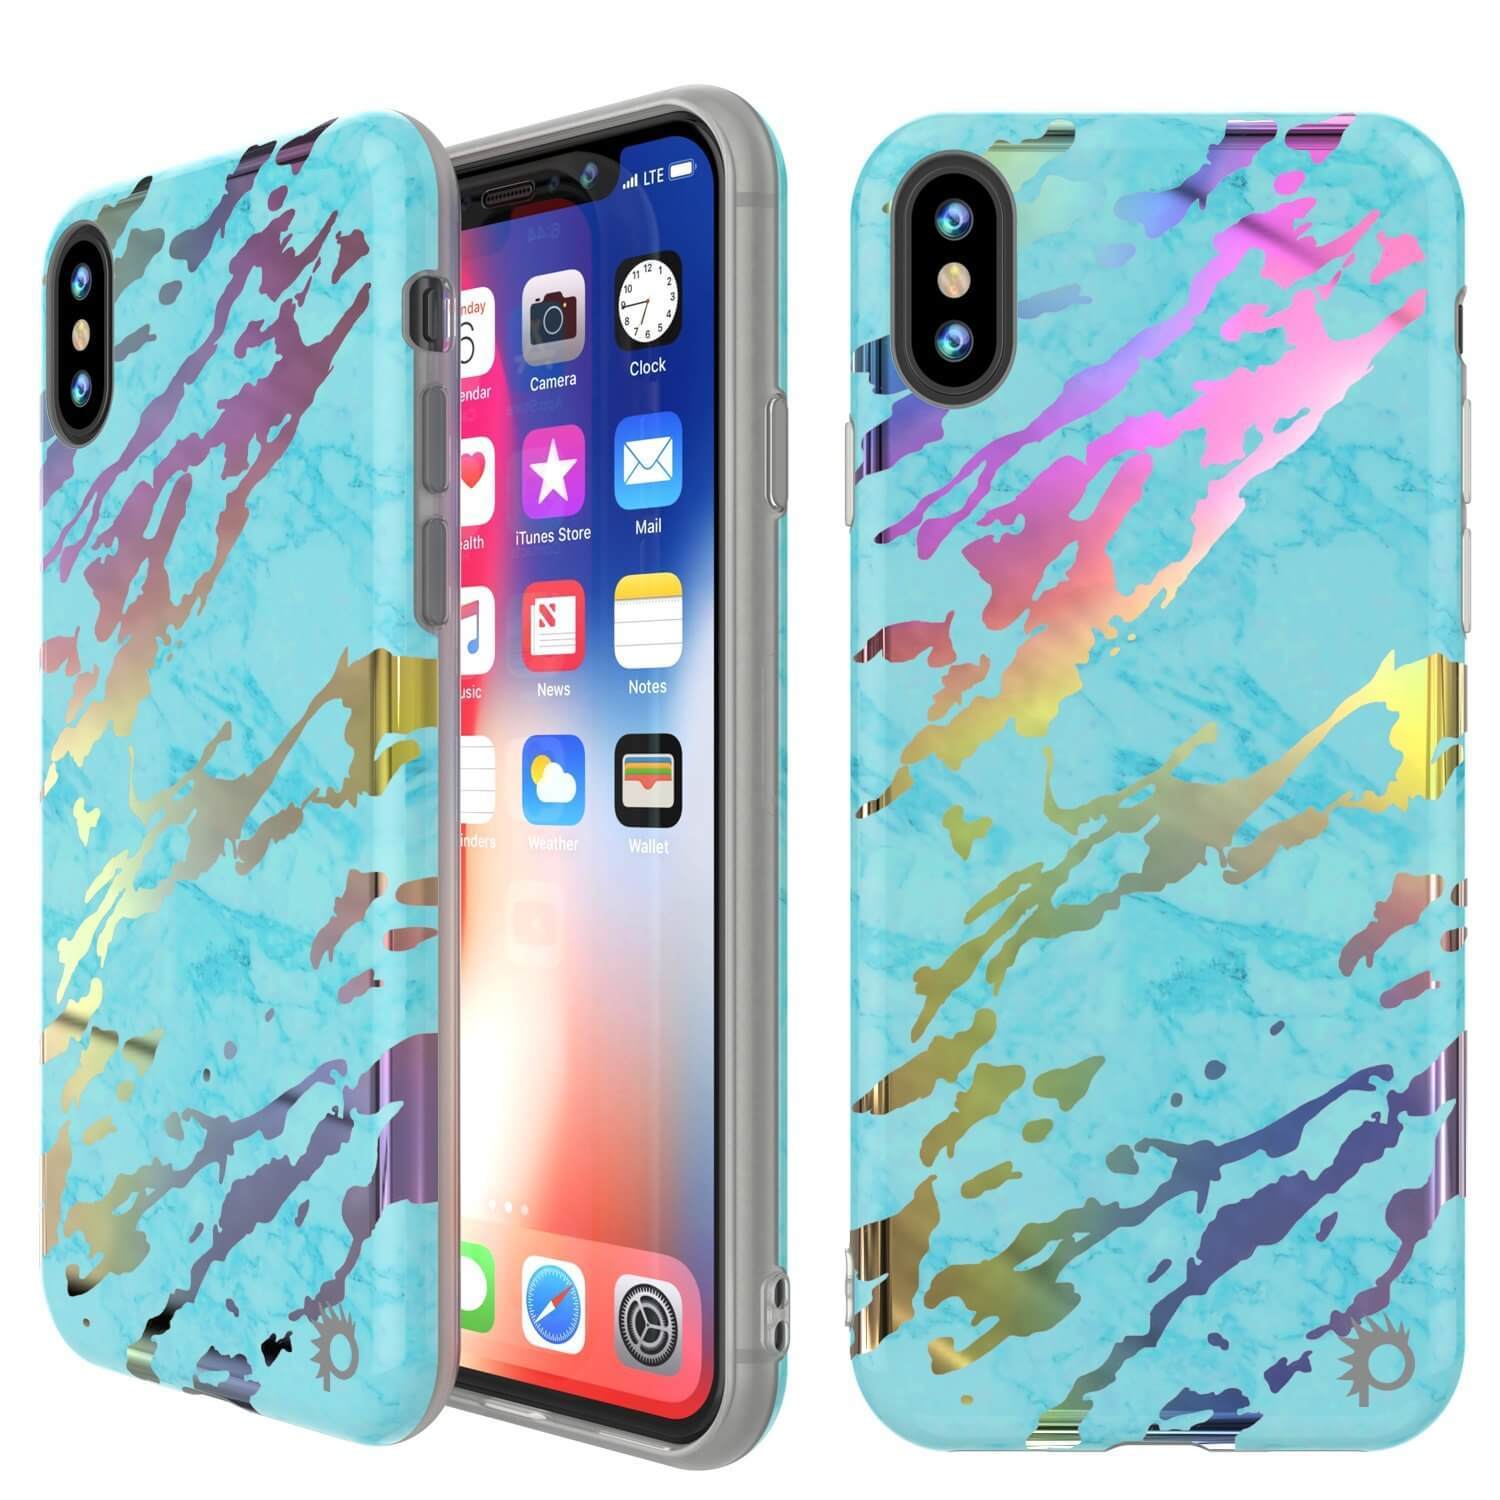 Punkcase iPhone X Marble Case, Protective Full Body Cover W/9H Tempered Glass Screen Protector (Teal Onyx)